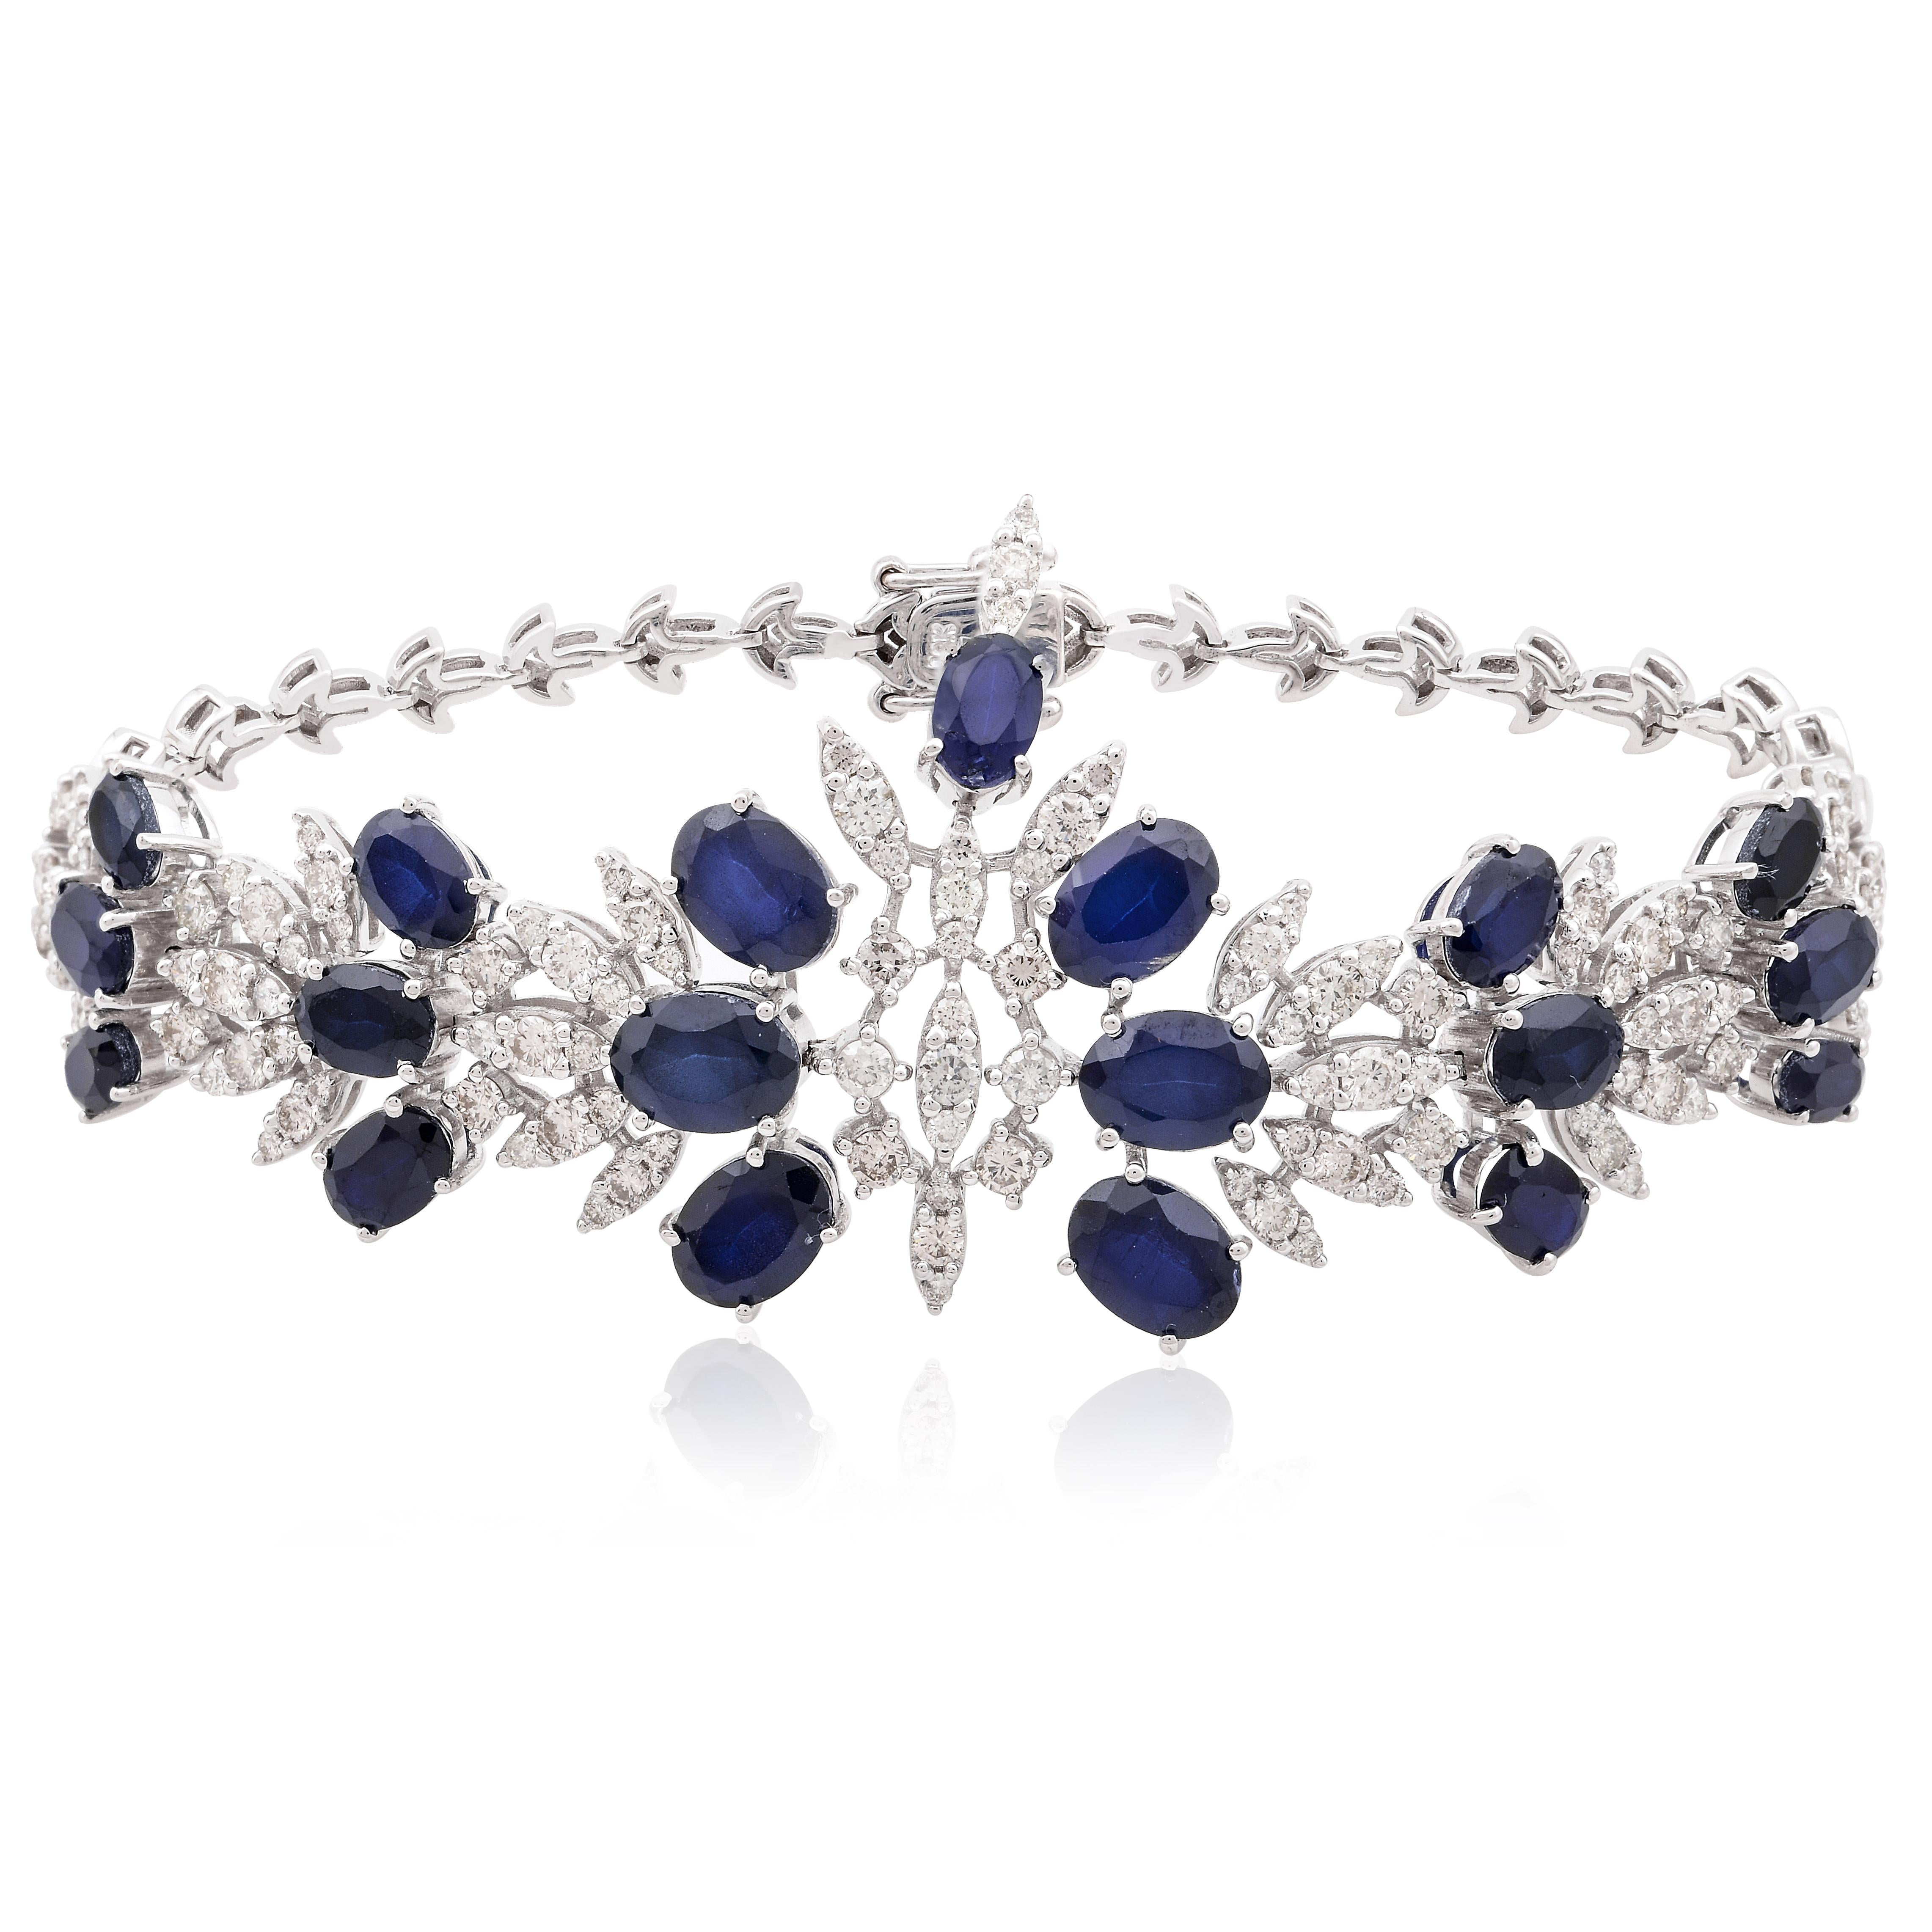 Oval Cut Blue Processed Gemstone Bracelet Natural Diamond Pave 18k White Gold Jewelry For Sale